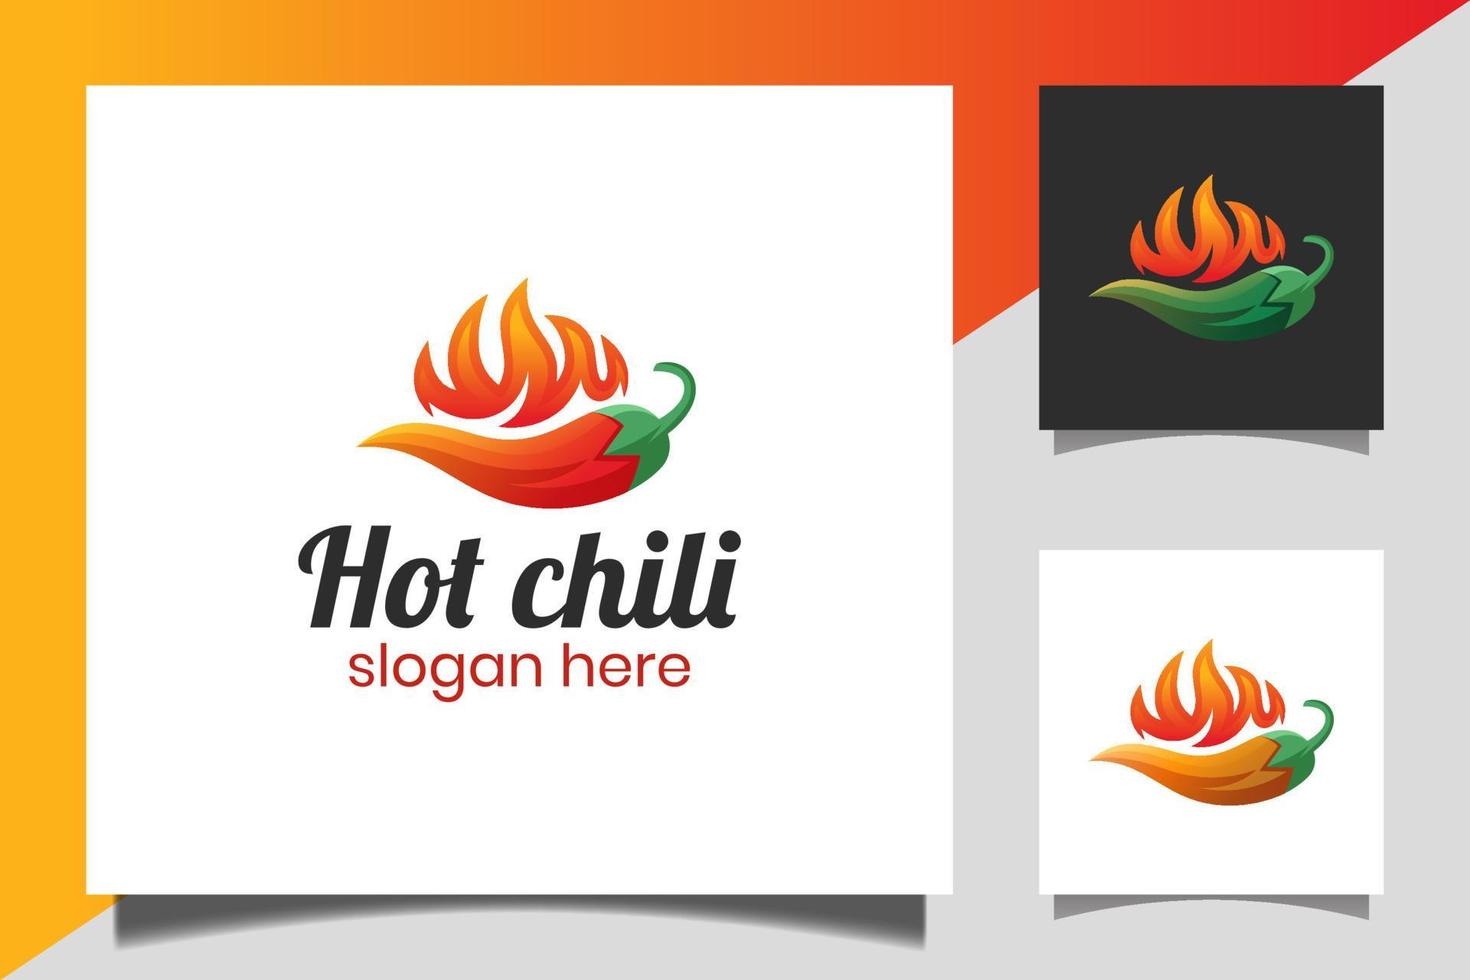 hot chili with burn fire restaurant logo. spicy mexican style food. for spicy food business logo design vector